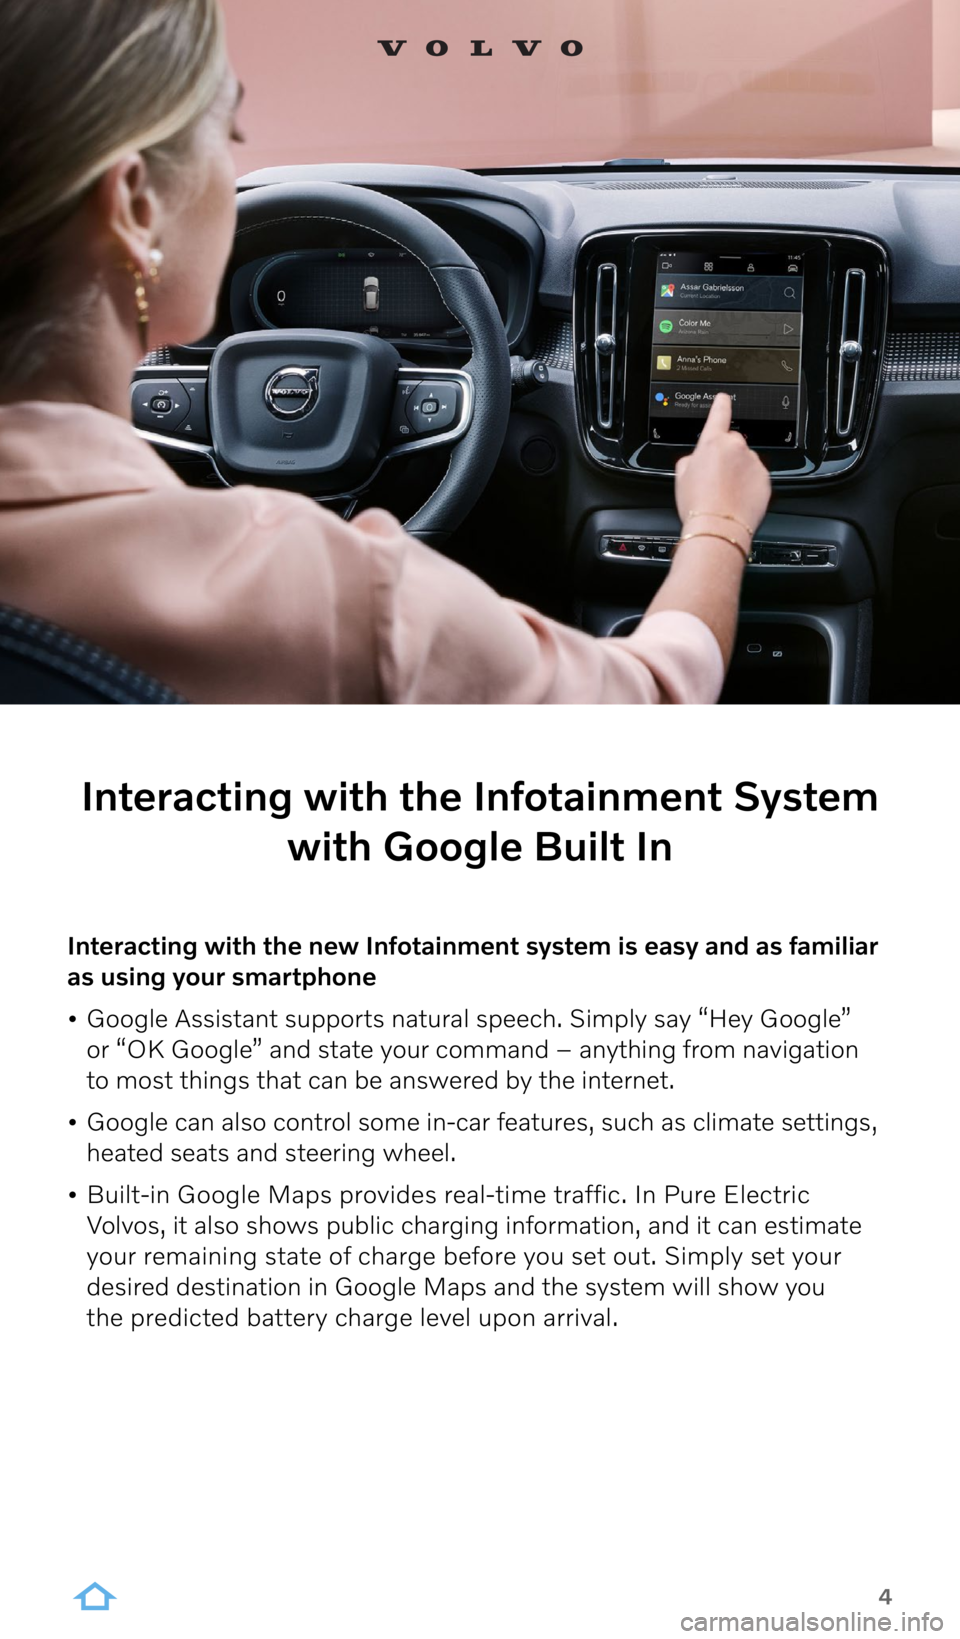 VOLVO XC60 2022  Google Digital Guide 4
Interacting with the Infotainment System with Google Built In
Interacting with the new Infotainment system is easy and as familiar 
as using your smartphone
•  Google Assistant supports natural sp